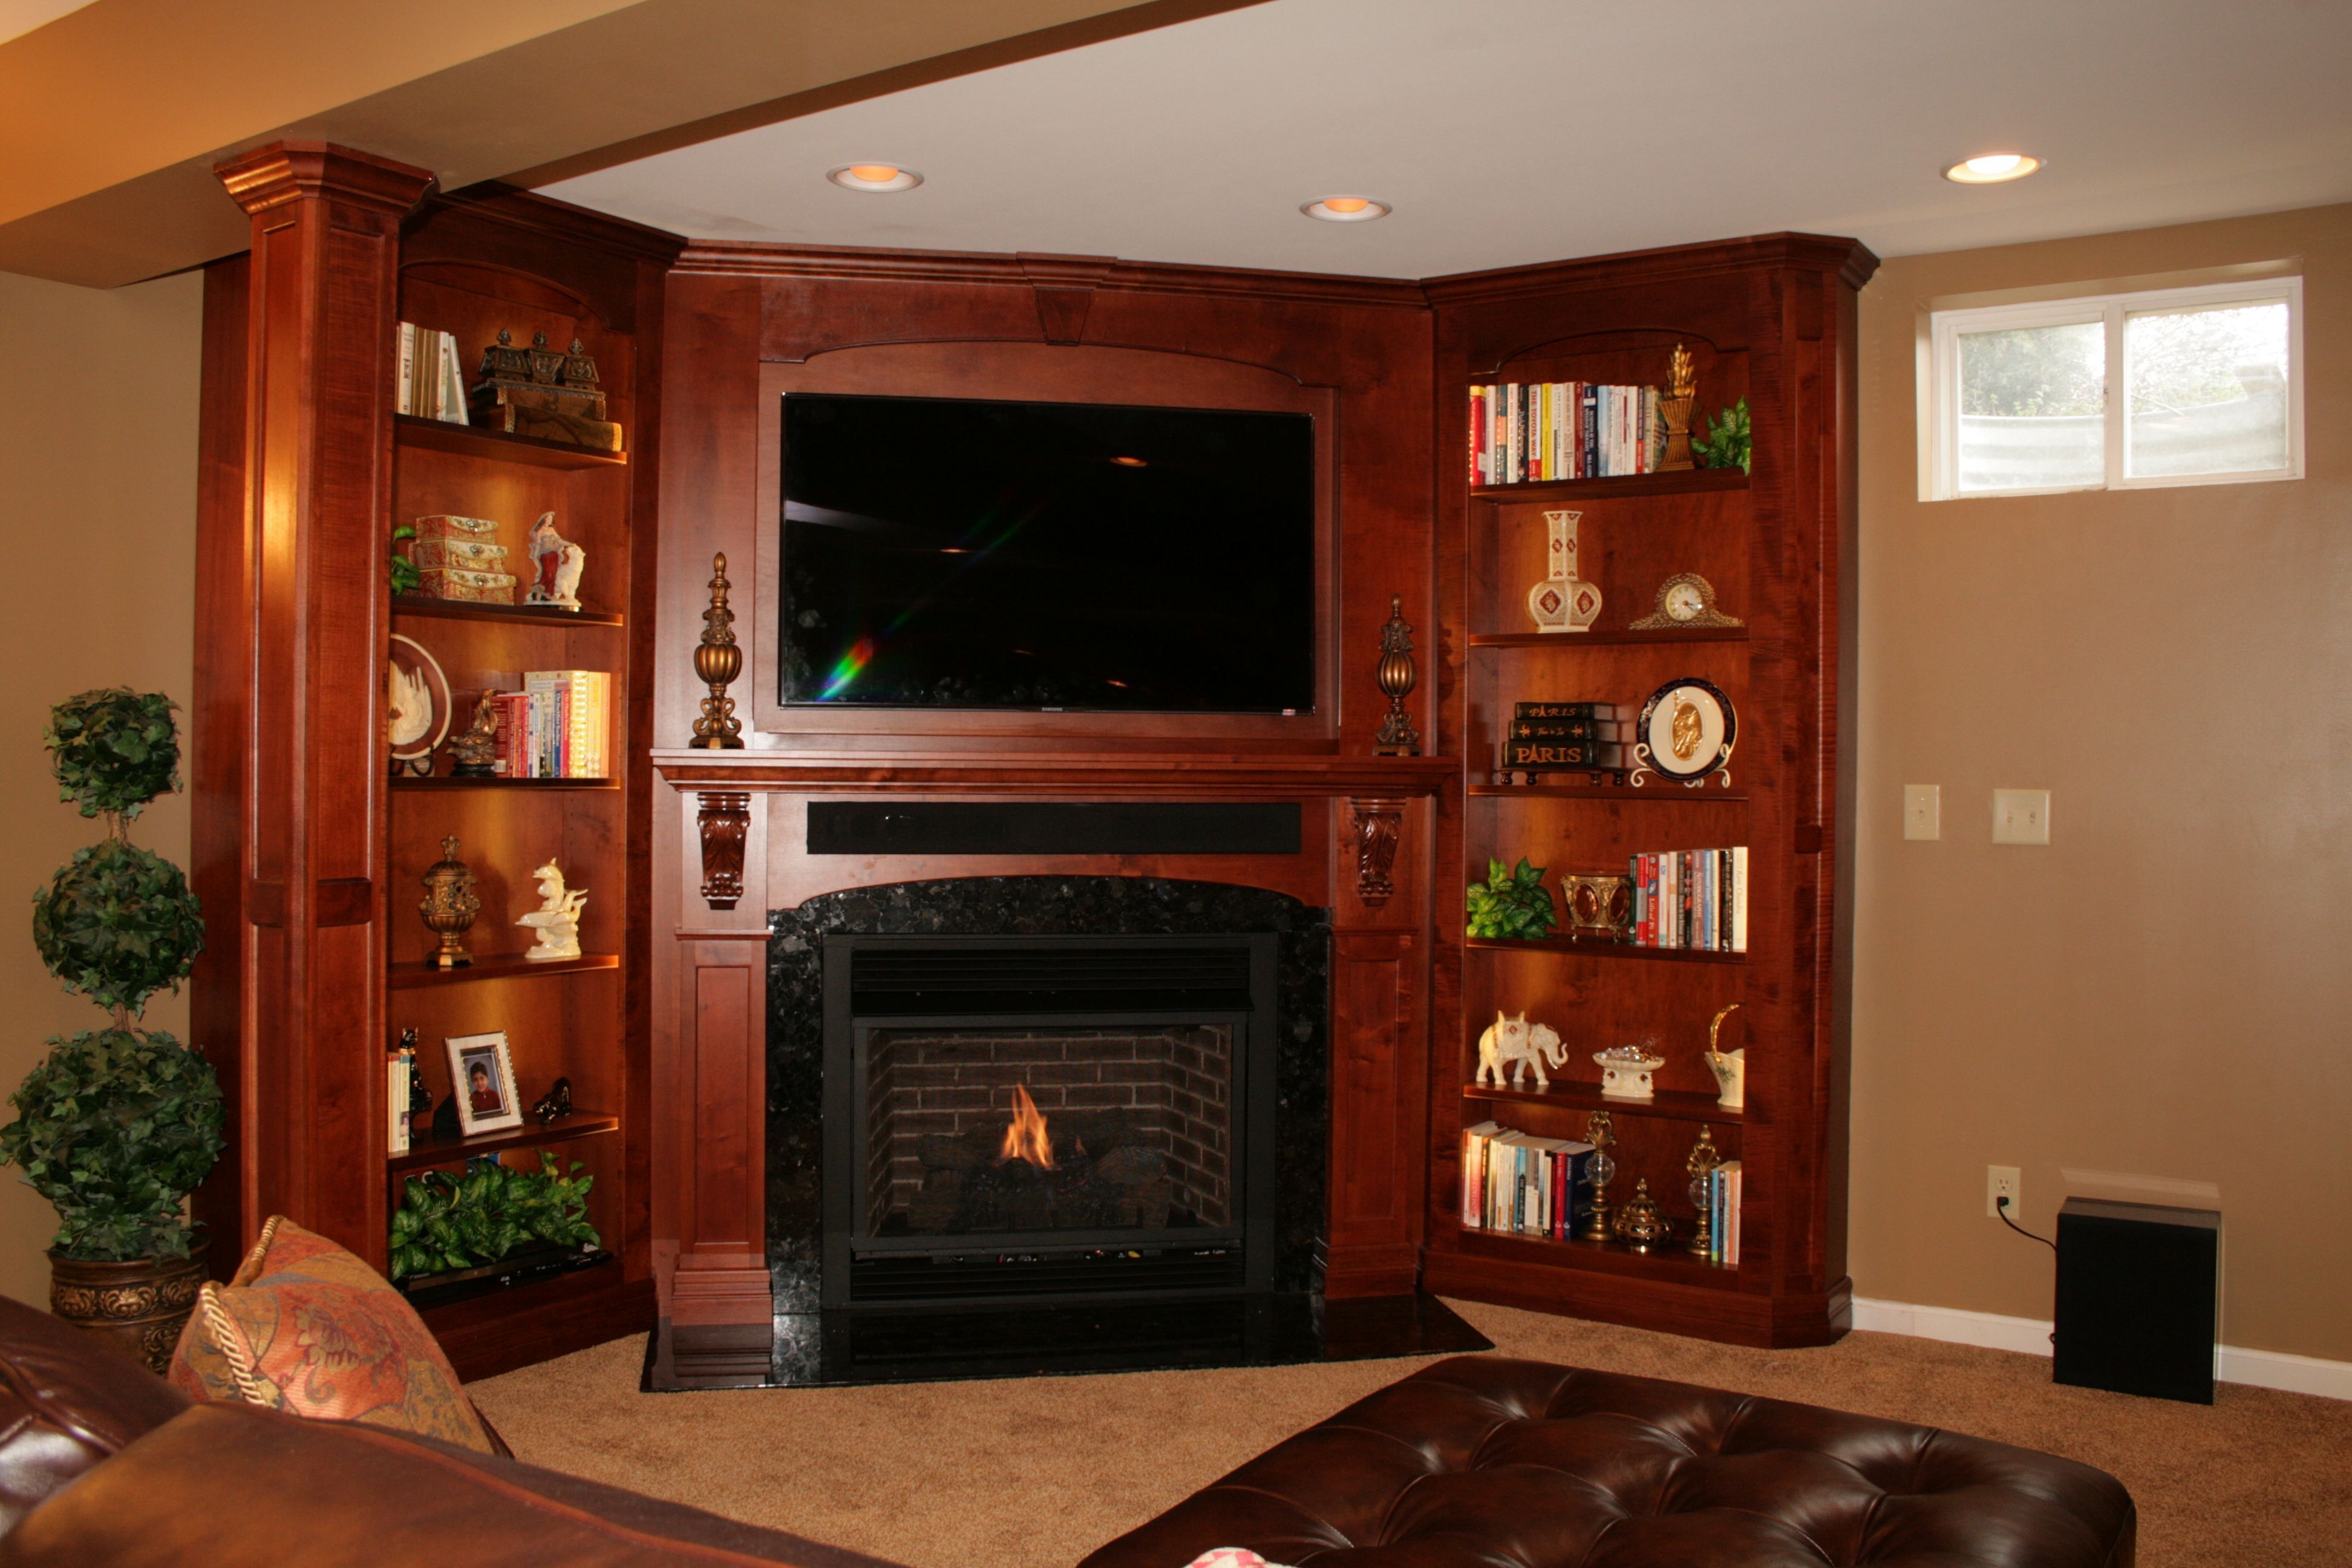 Handmade Solid Wood Built In Tv Wall Unit Fireplace And Bookcase Throughout Built In Tv Bookcase (View 10 of 15)